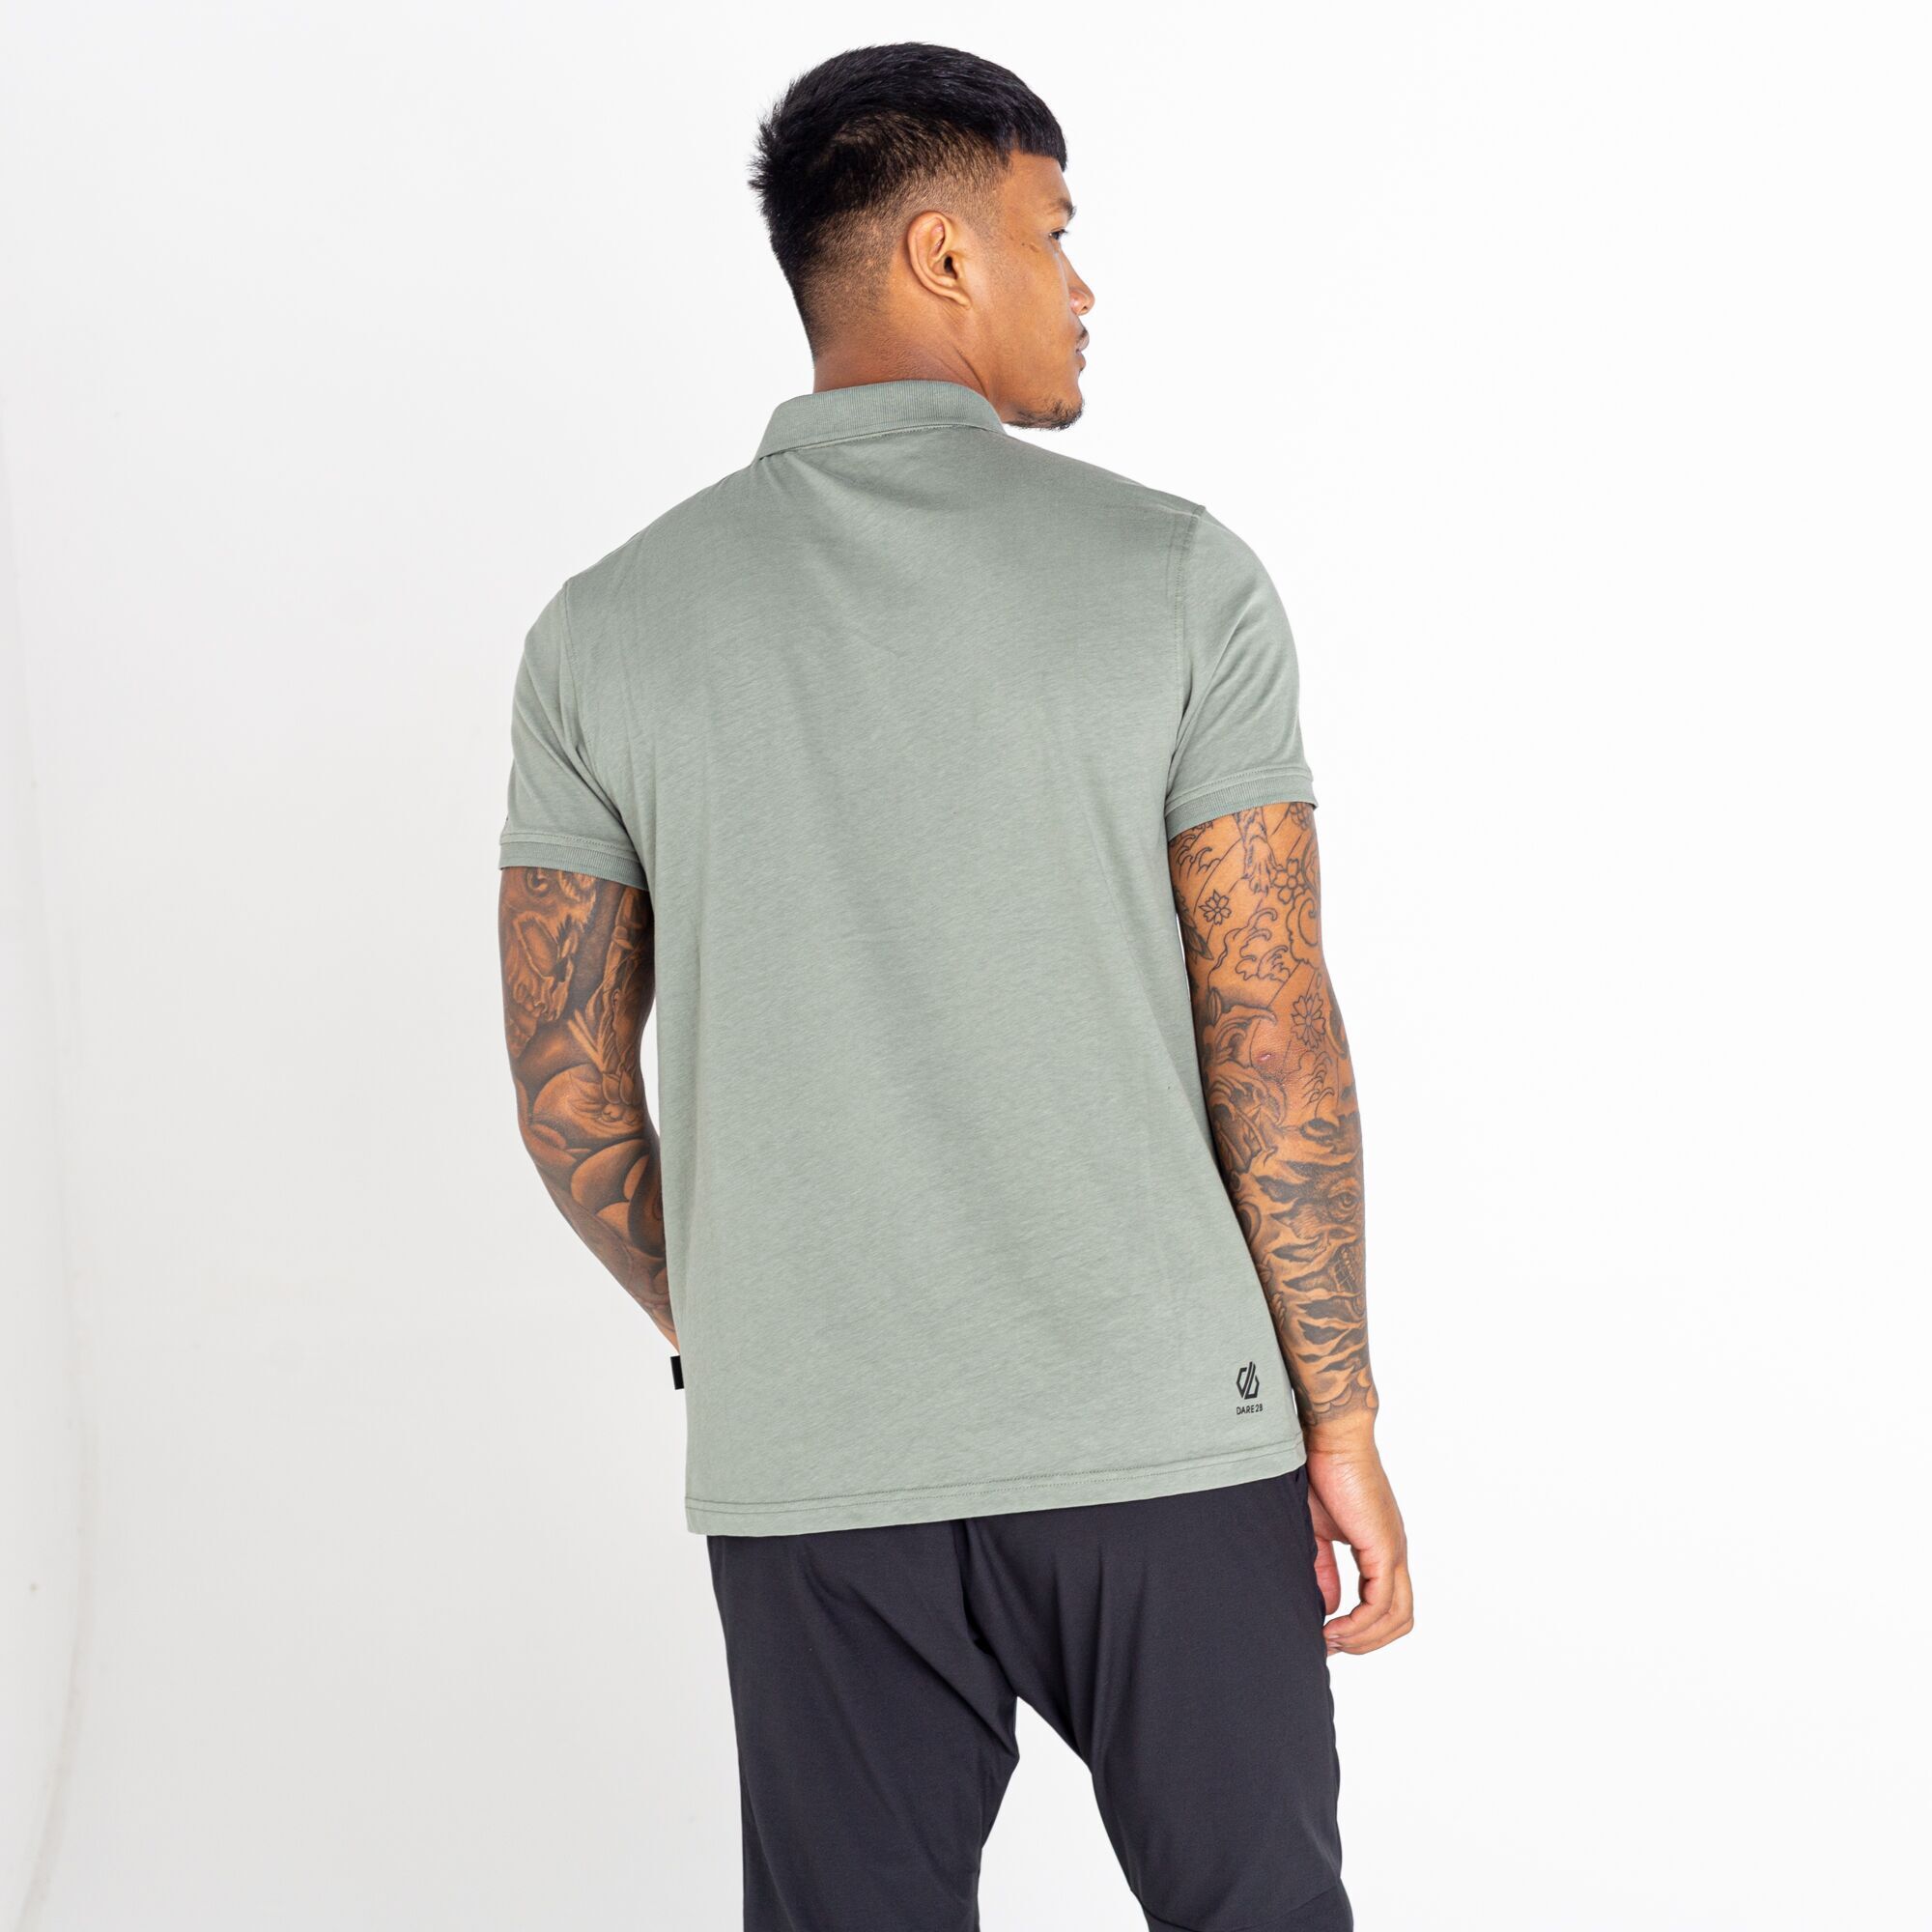 100% Organic Cotton. Fabric: Single Jersey, Soft Touch. Design: Logo, Plain. Neckline: Buttoned, Collared, Ribbed Collar. Fastening: Pull Over. Cuff: Ribbed. Hem: Ribbed. Sleeve-Type: Short-Sleeved. 2 Button Placket. Fabric Technology: Breathable, Lightweight.